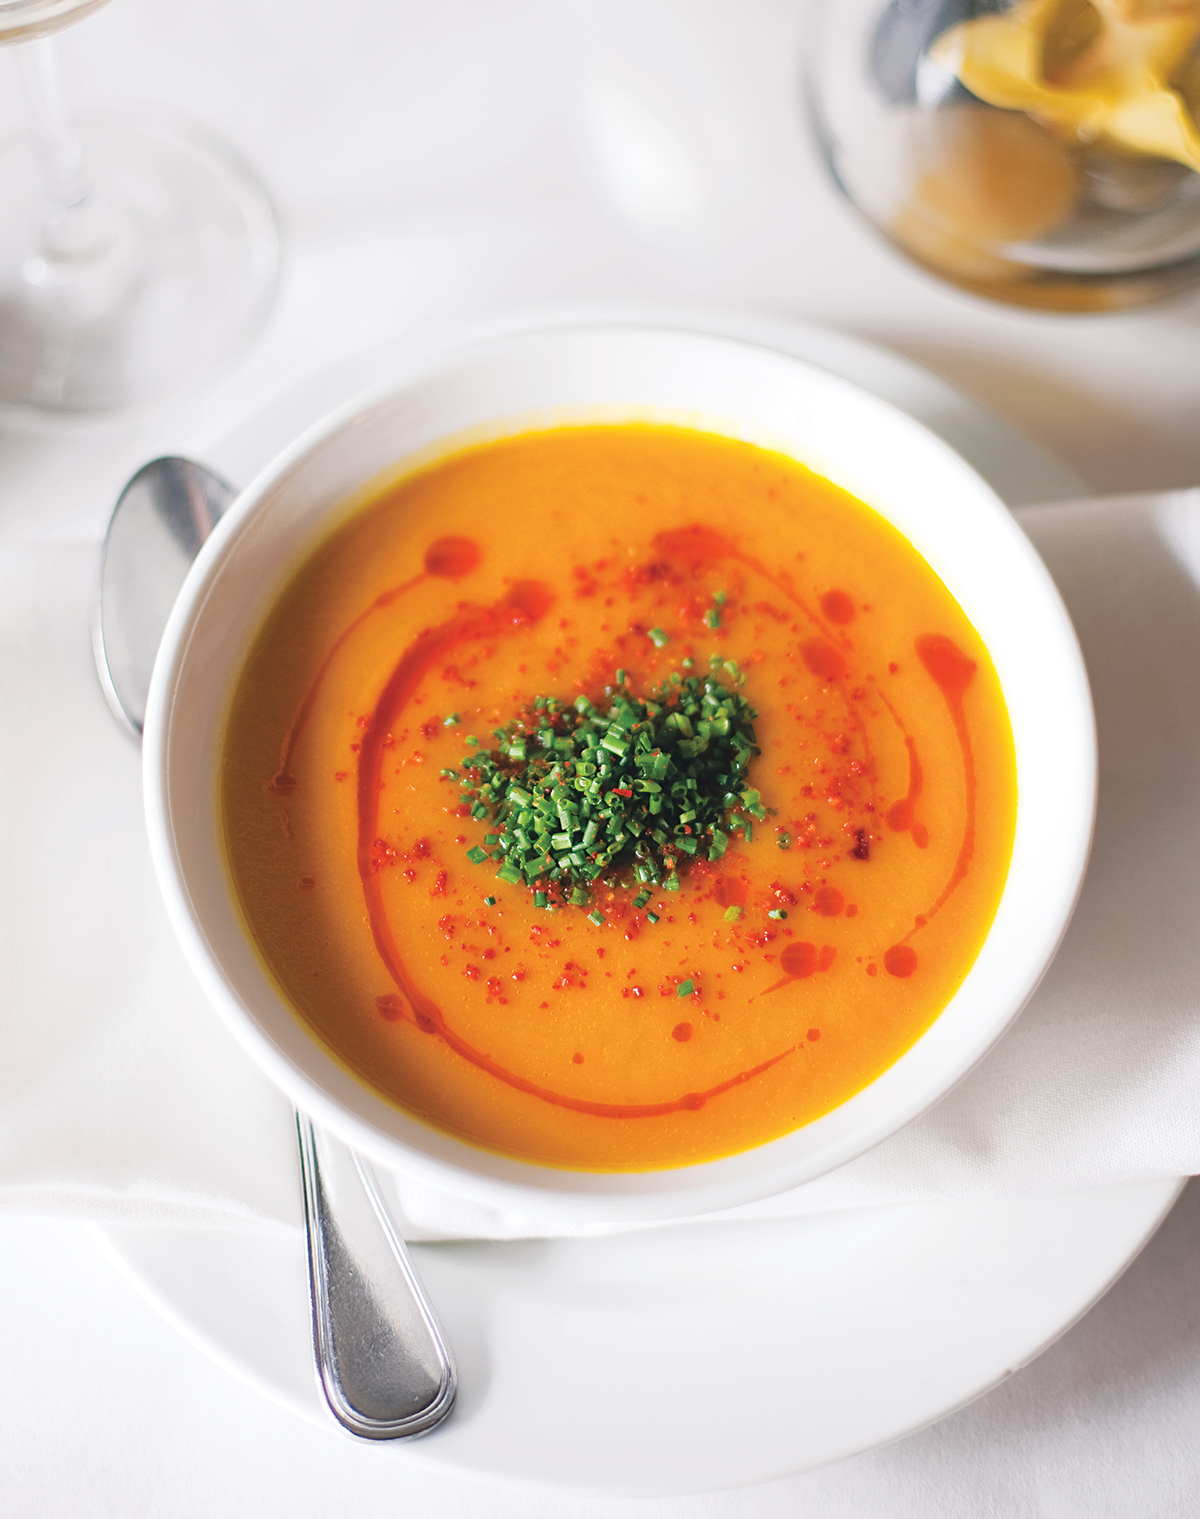 Red kuri squash soup at Ten Tables—Cambridge. Photograph by Michael Piazza.